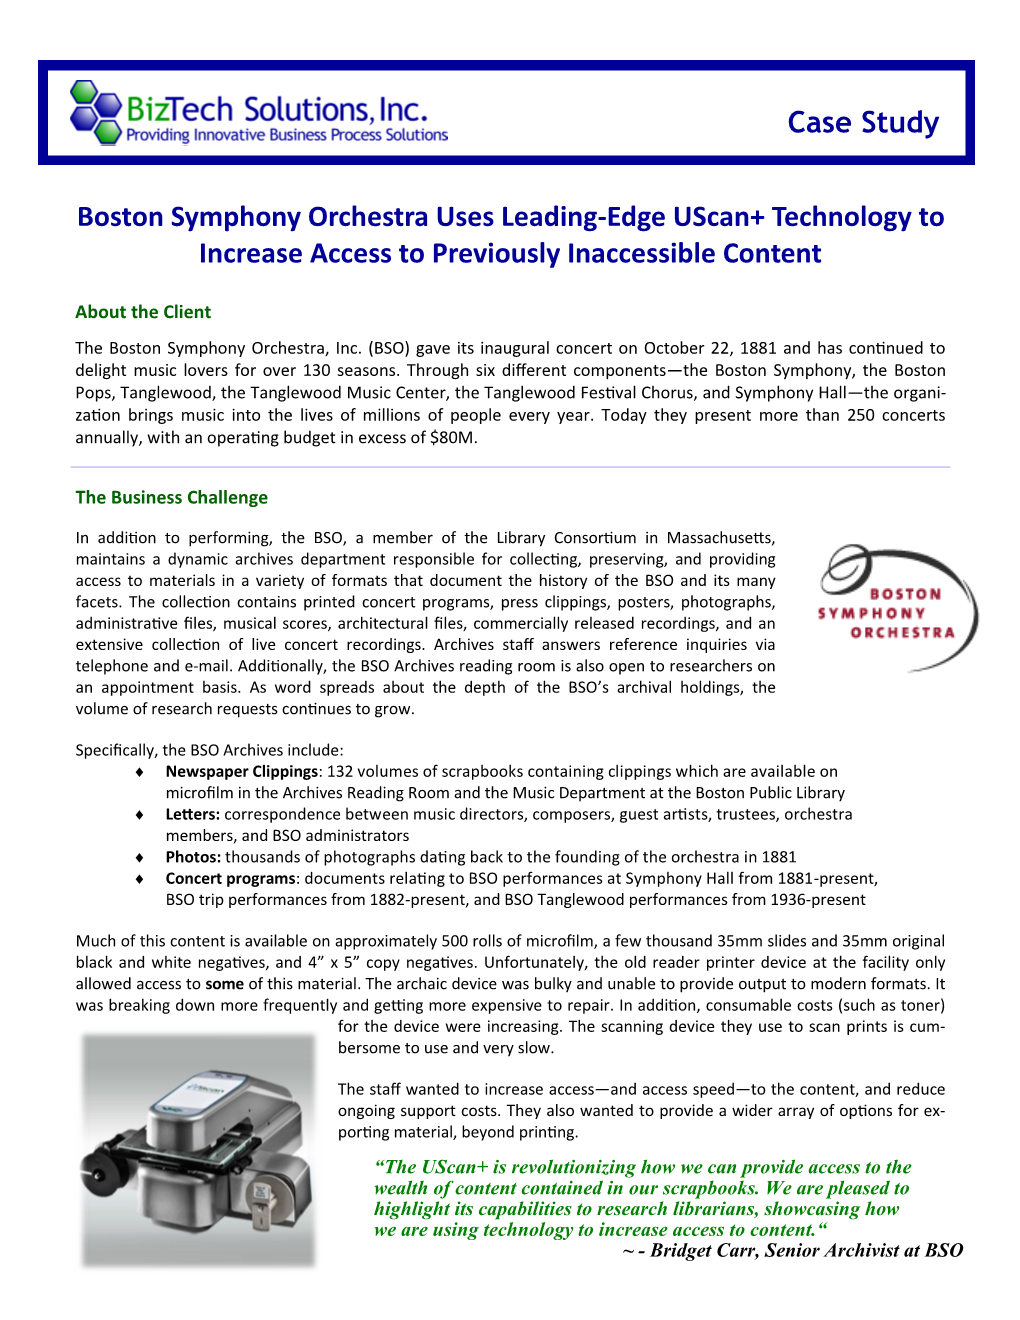 Boston Symphony Orchestra Uses Leading-Edge Uscan+ Technology to Increase Access to Previously Inaccessible Content